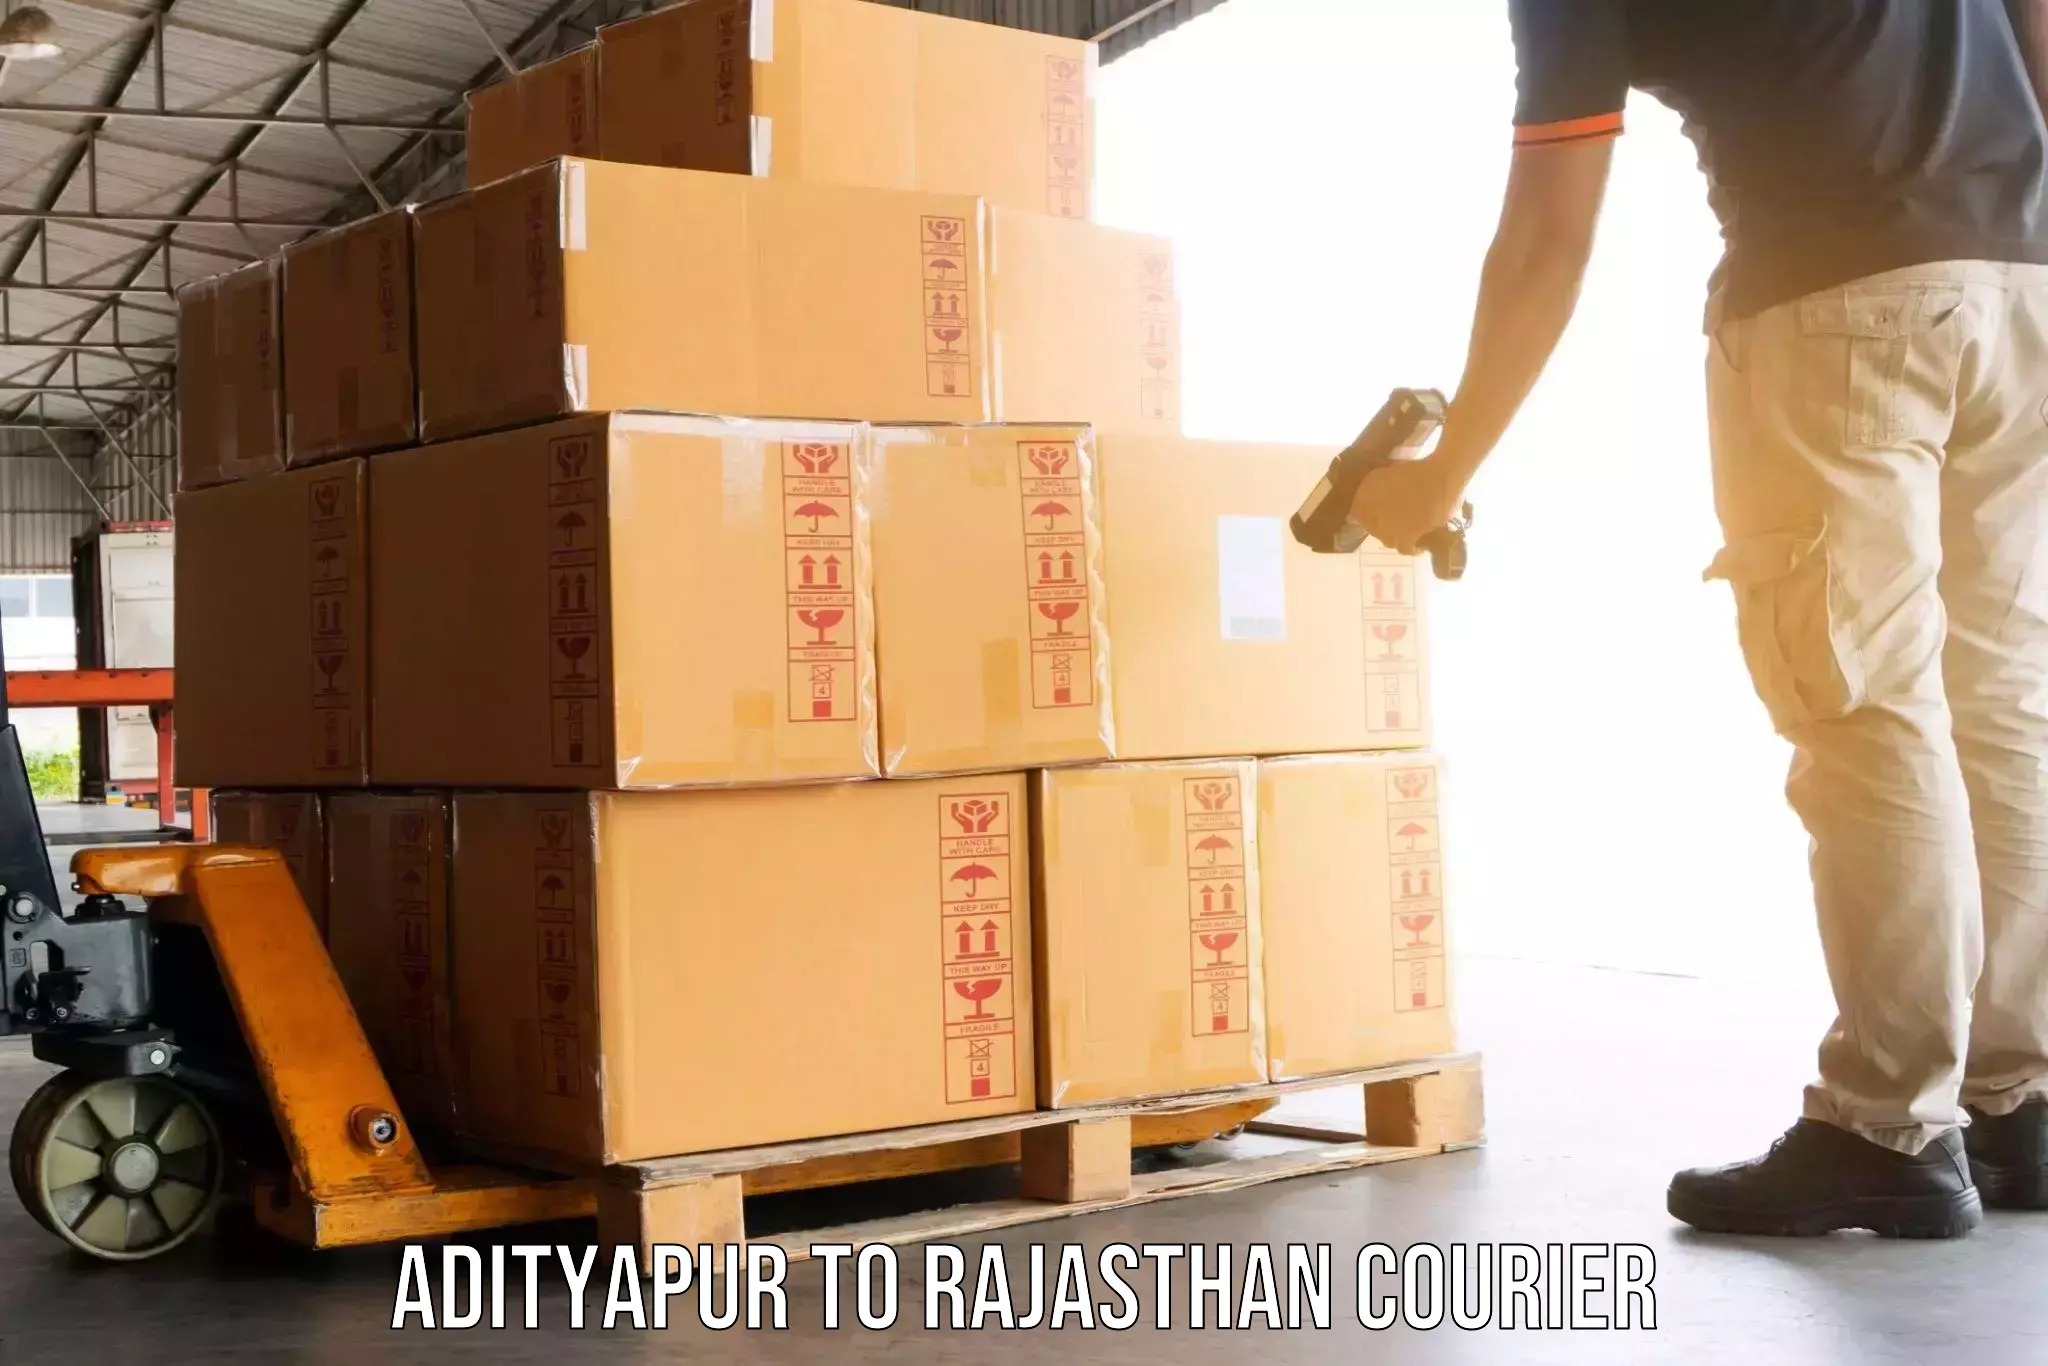 Furniture transport specialists Adityapur to Khanpur